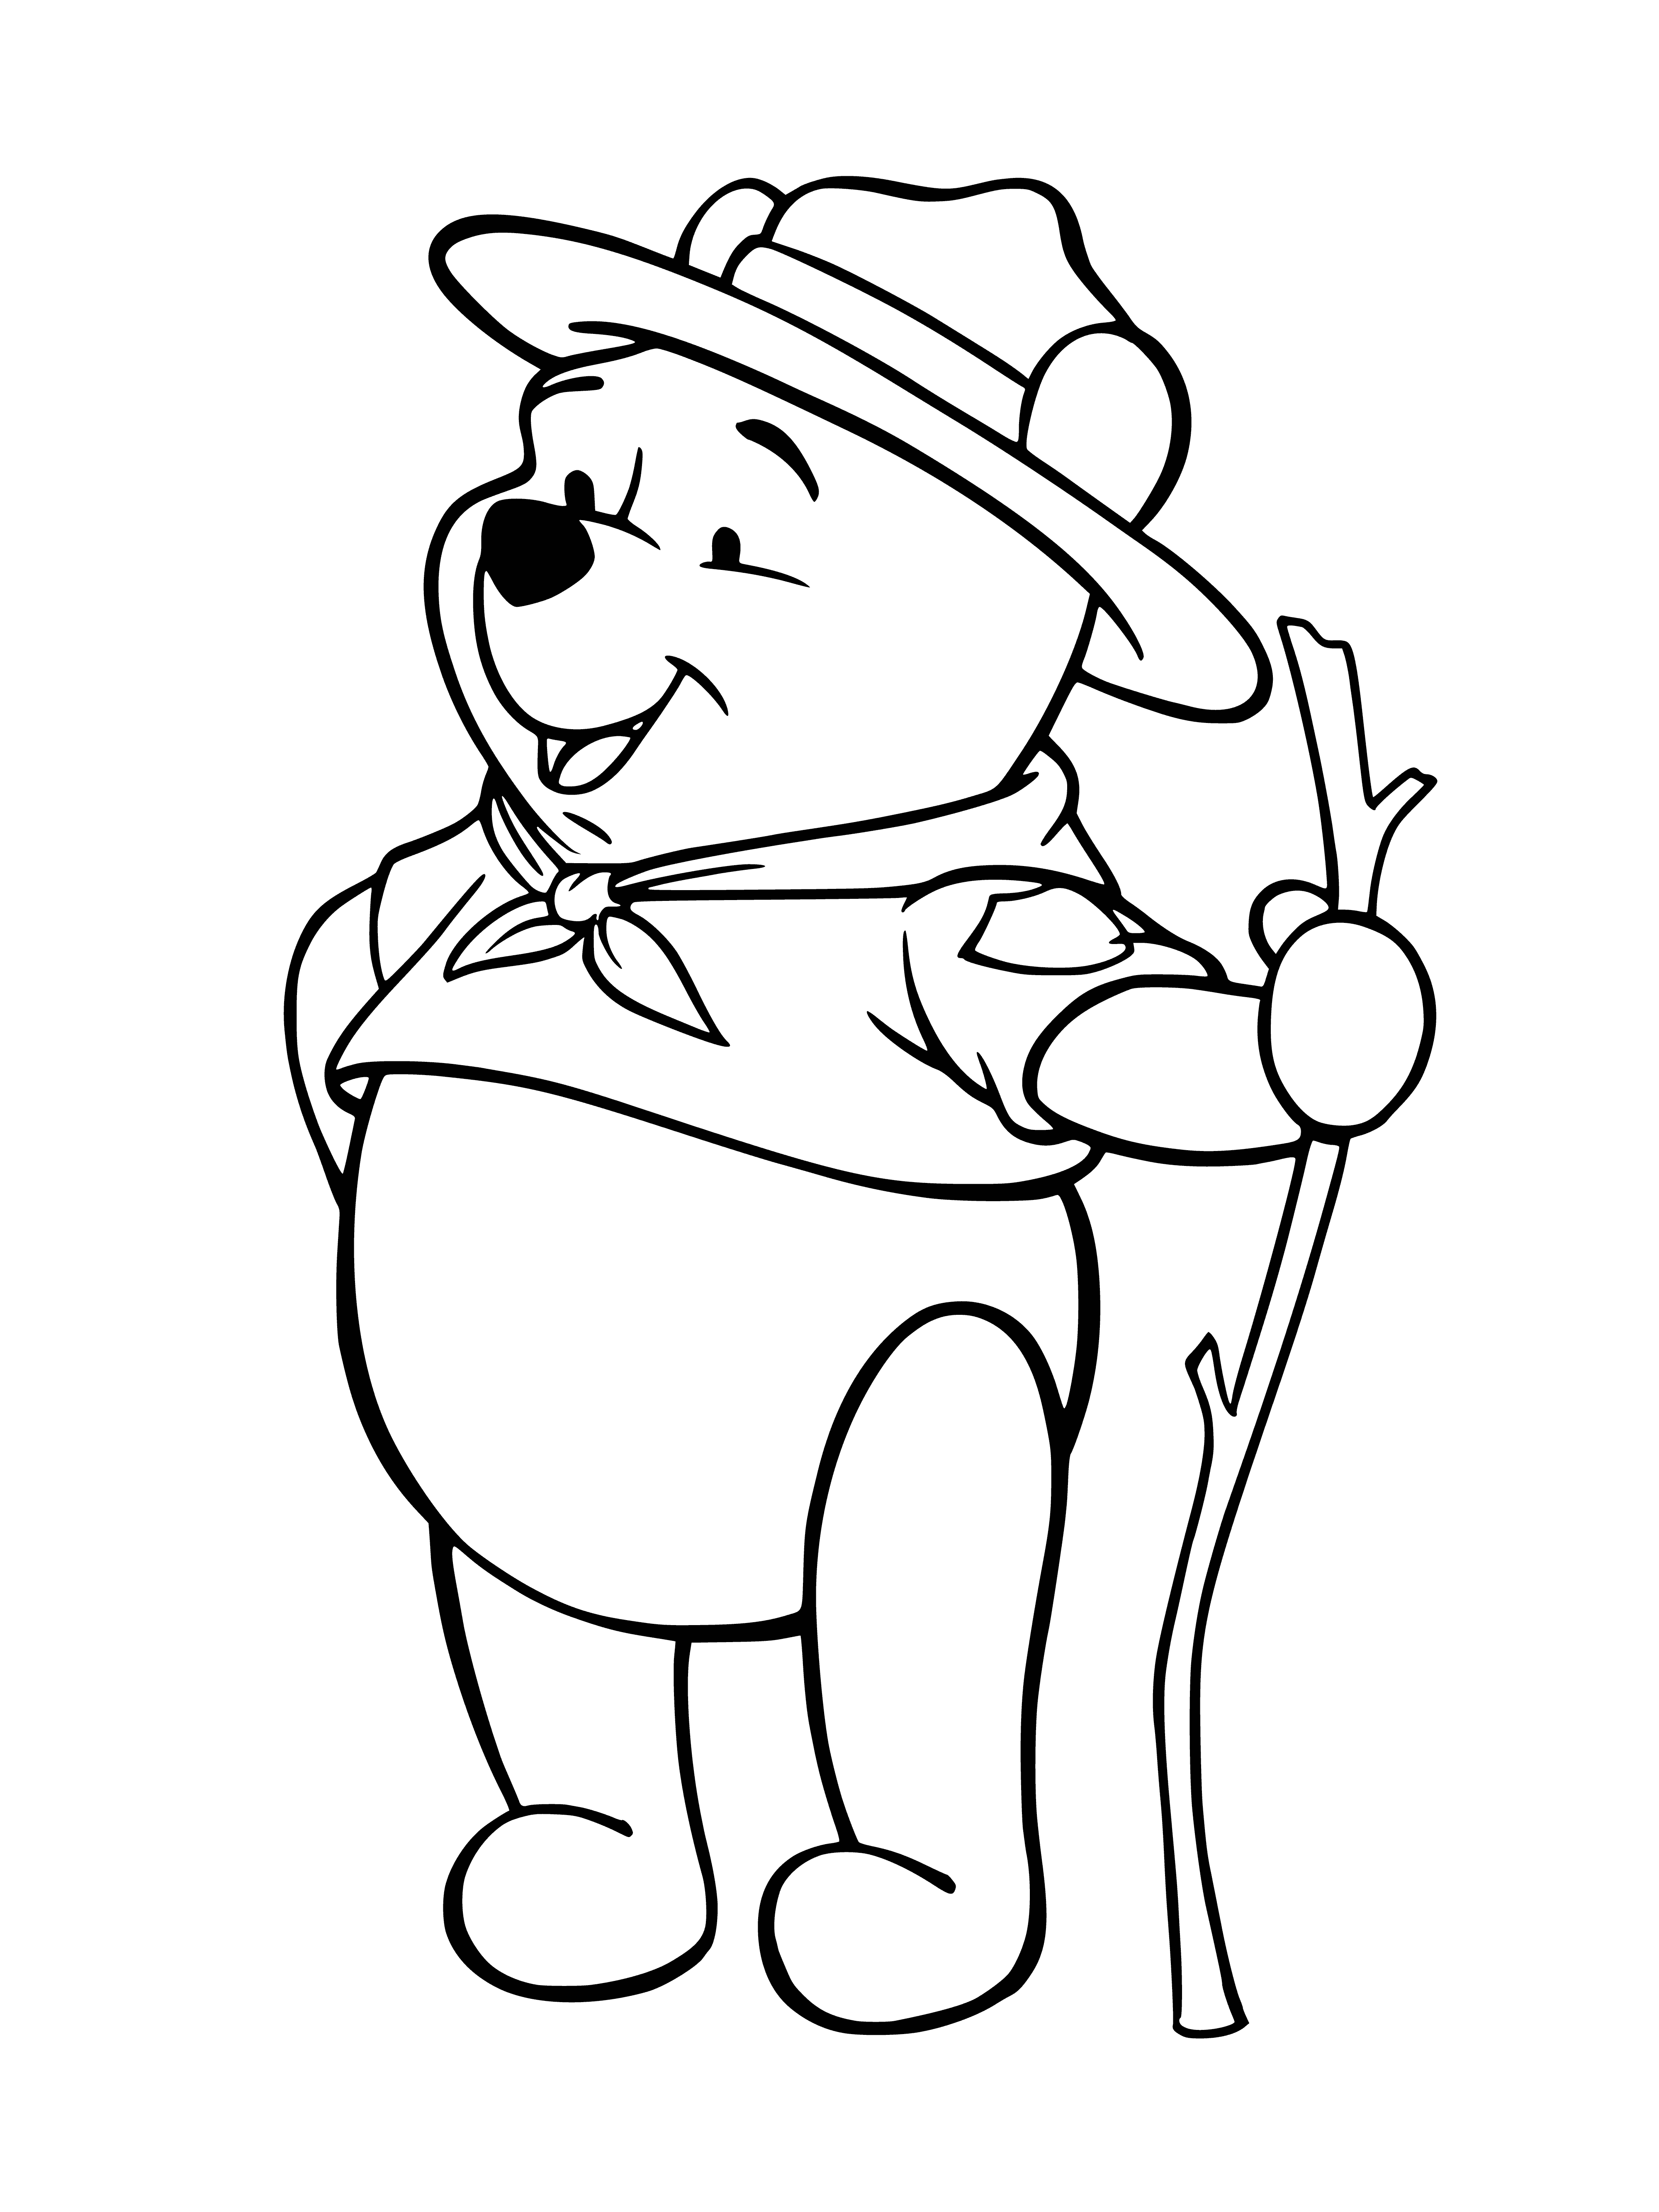 coloring page: Winnie the Pooh on a fishing expedition in a river, wearing a green hat and red shirt. A fish on the line, a forest behind him.